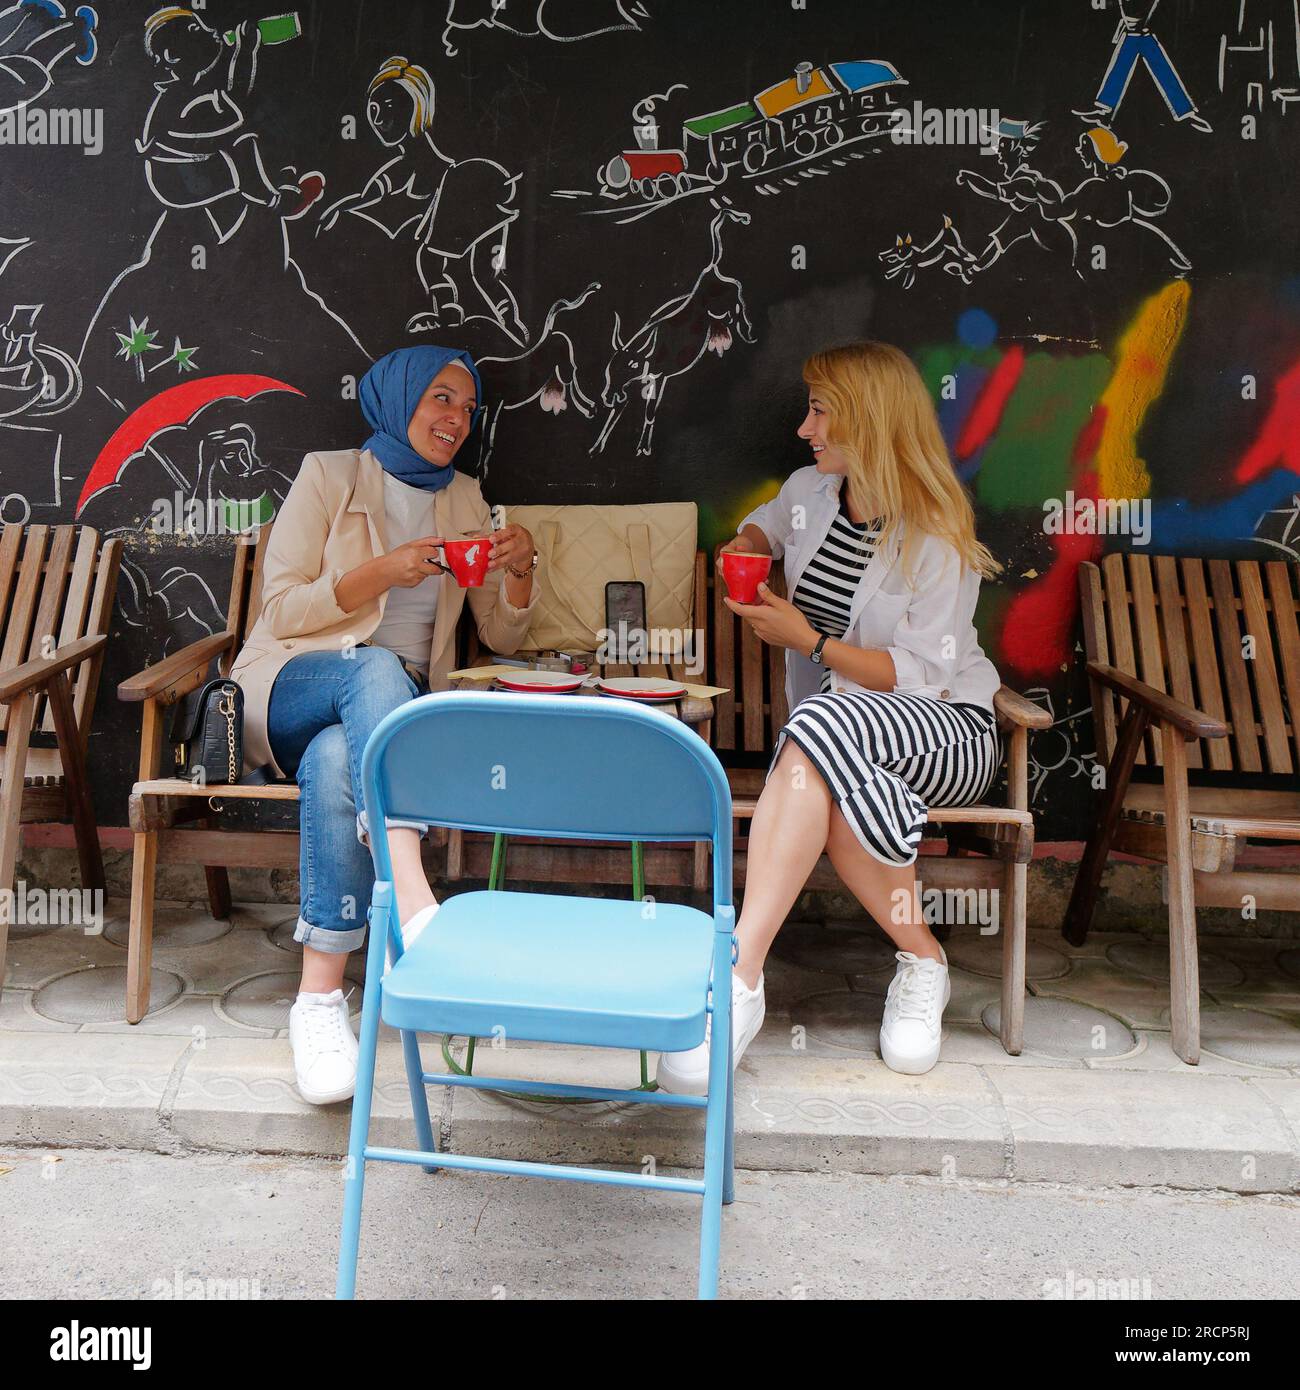 Two friends chat and smile over a coffee at a cafe/restaurant in the Karakoy neighbourhood of Istanbul, Turkey Stock Photo